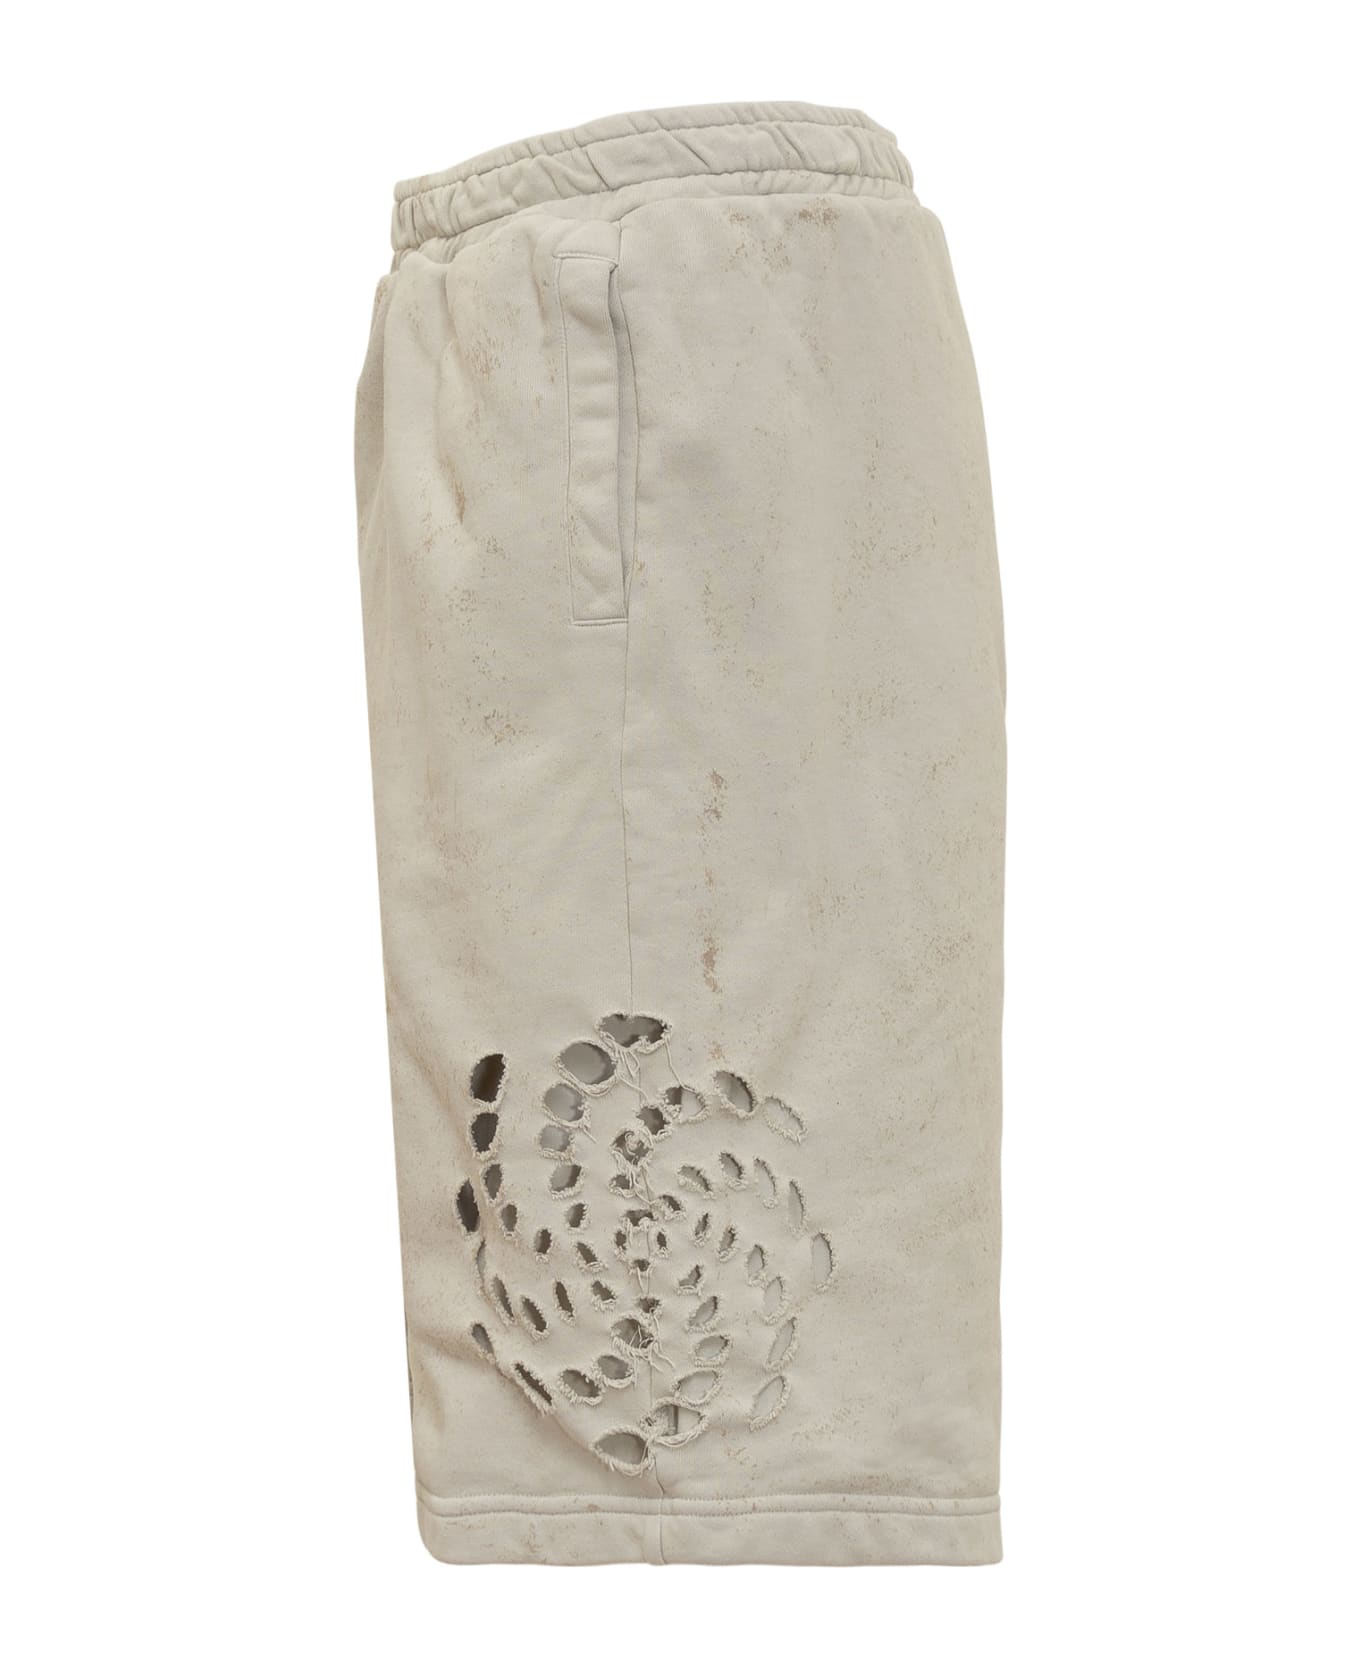 44 Label Group Shorts With Vortex Pattern - DIRTY WHITE-GYPS